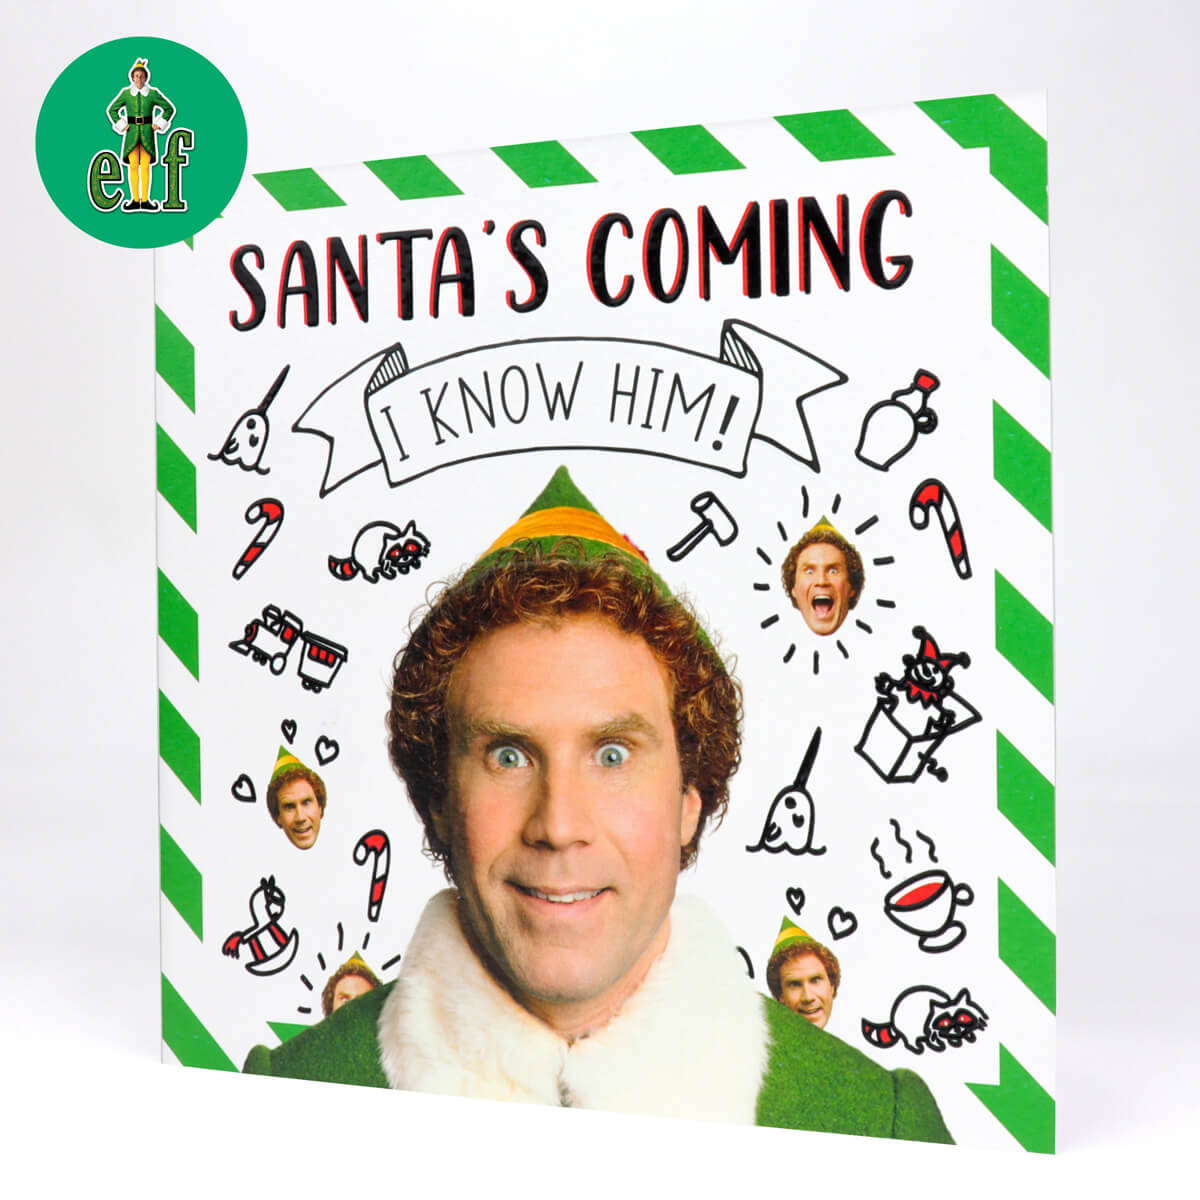 Buddy The Elf Funny Christmas Card Featuring Will Ferell.  Card pictured on a white background